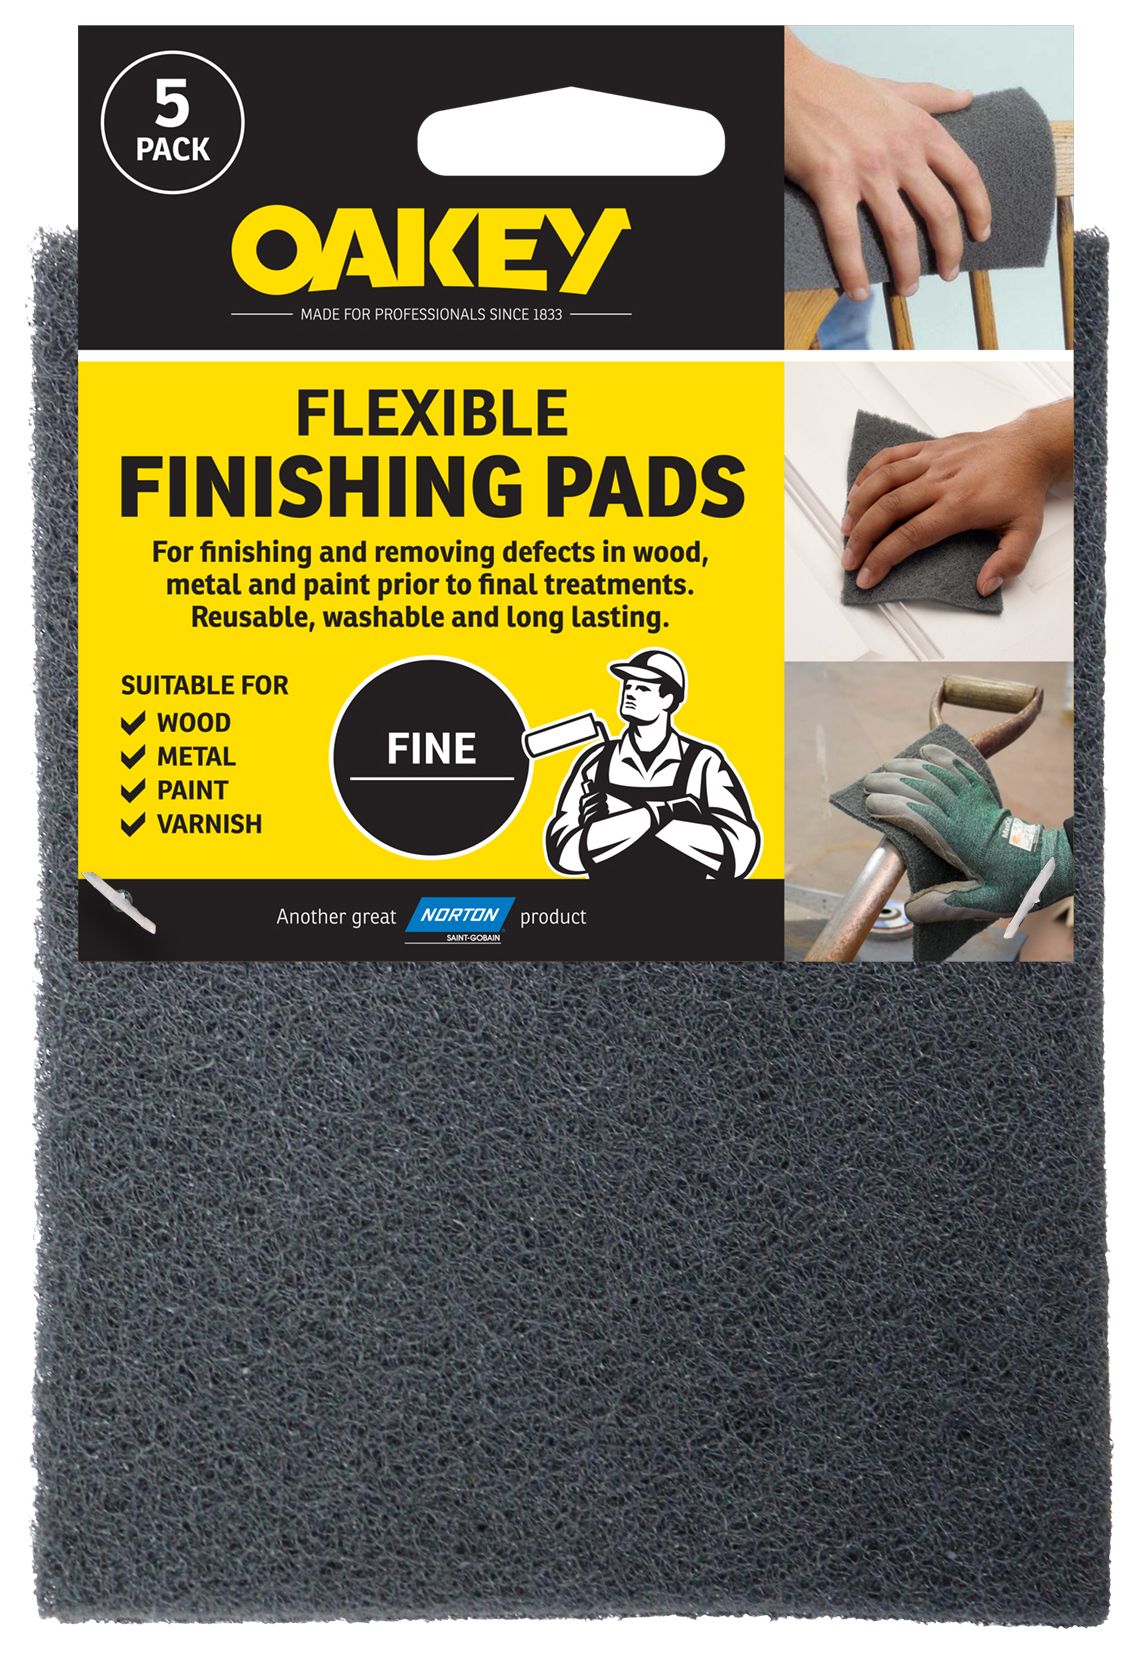 Image of Oakey Flexible Finishing Pads - Pack of 5